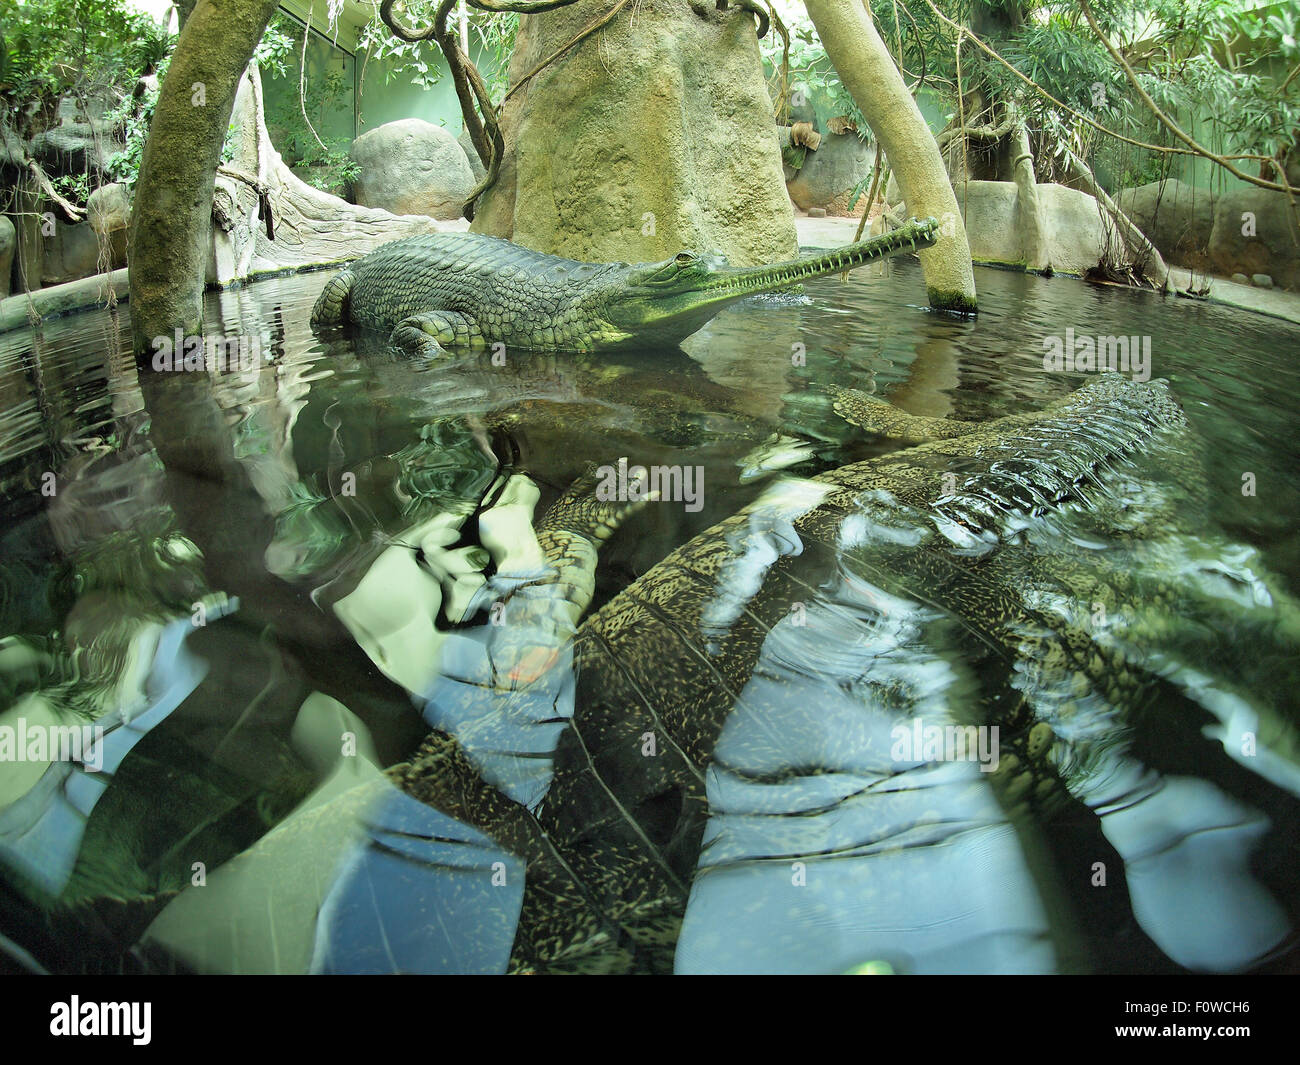 Indian crocodile gavialis gangeticus in zoo an artificial pond Stock Photo